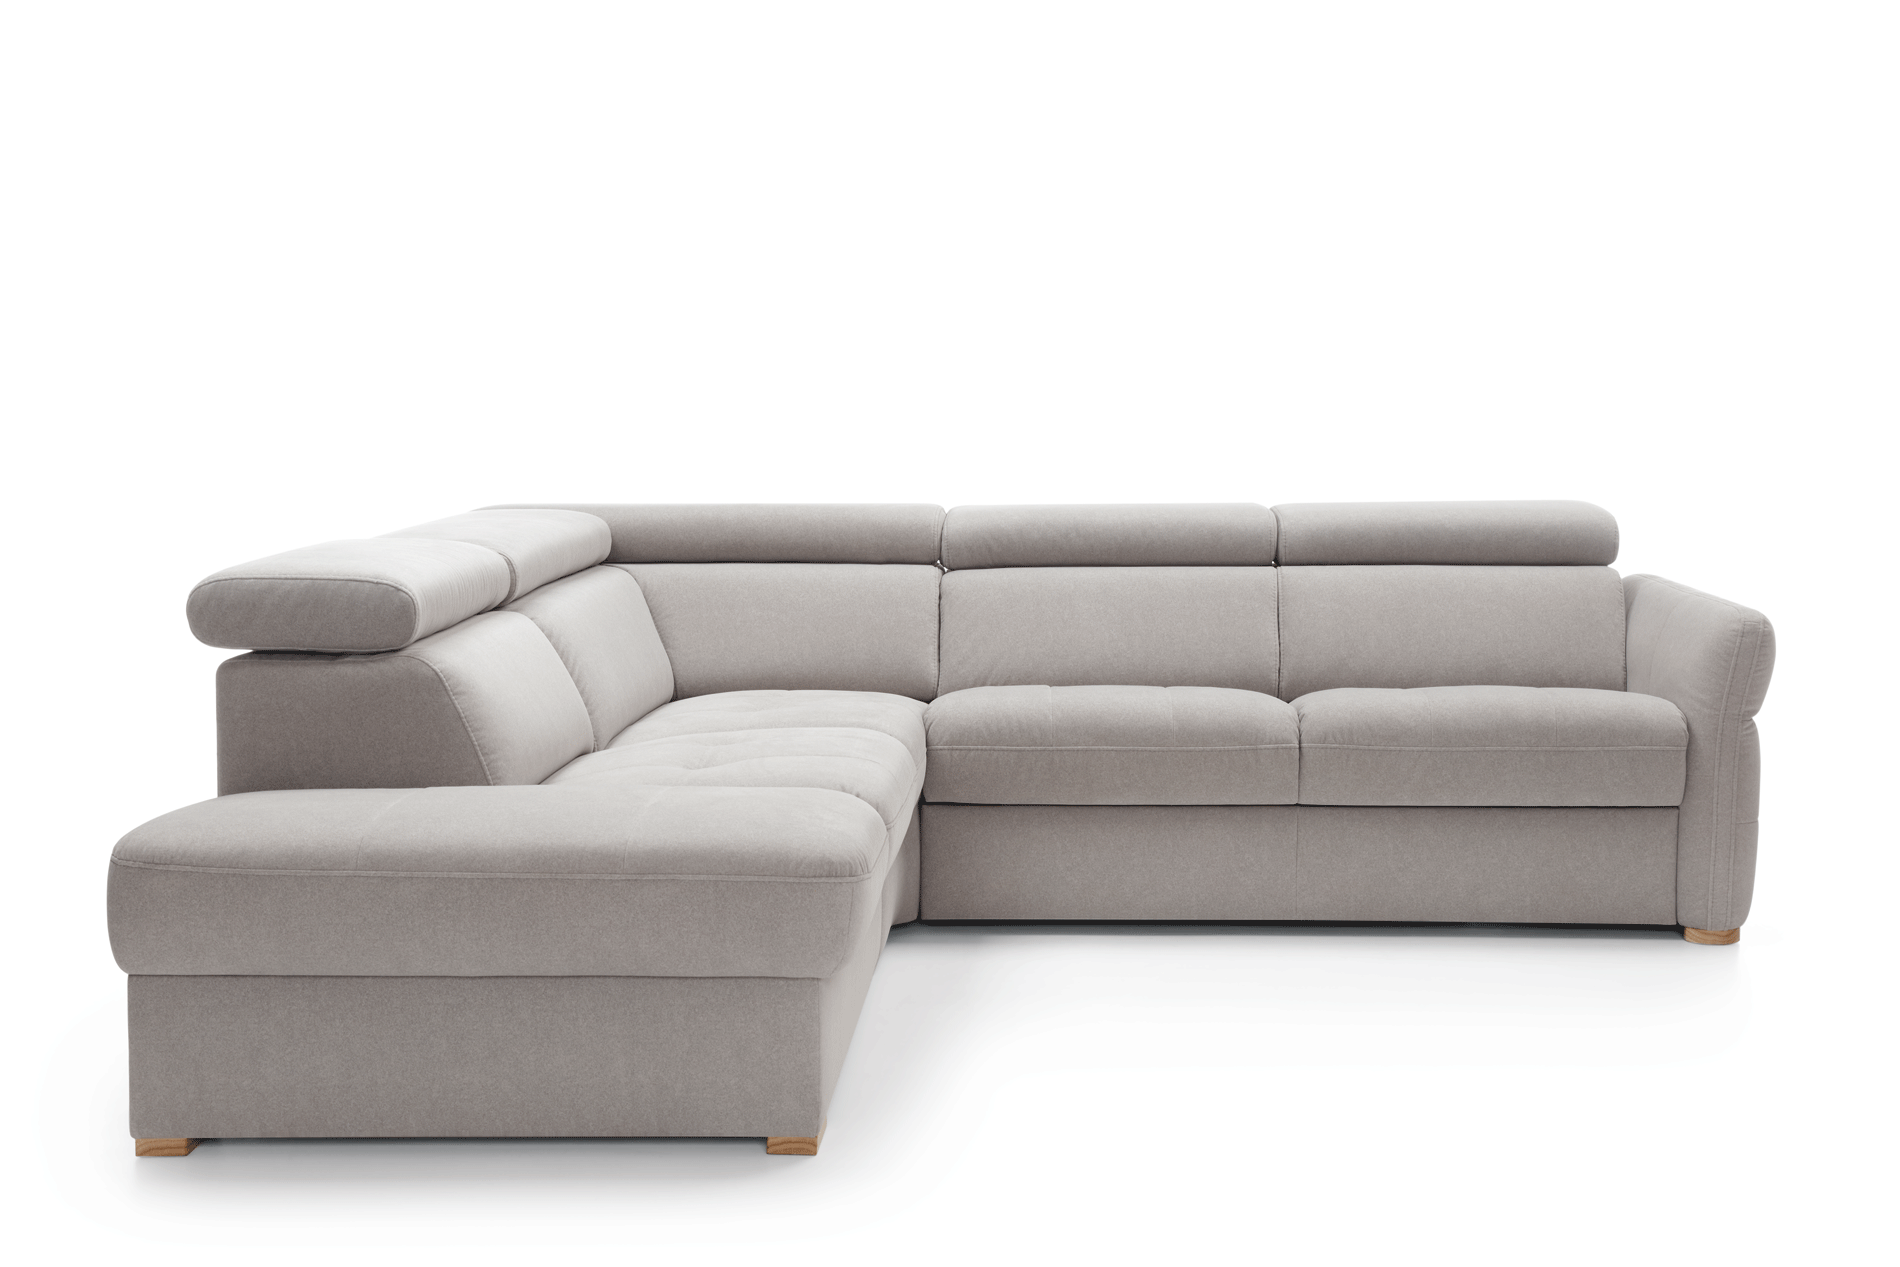 Brands ALF Capri Coffee Tables, Italy Massimo Sectional w/ storage